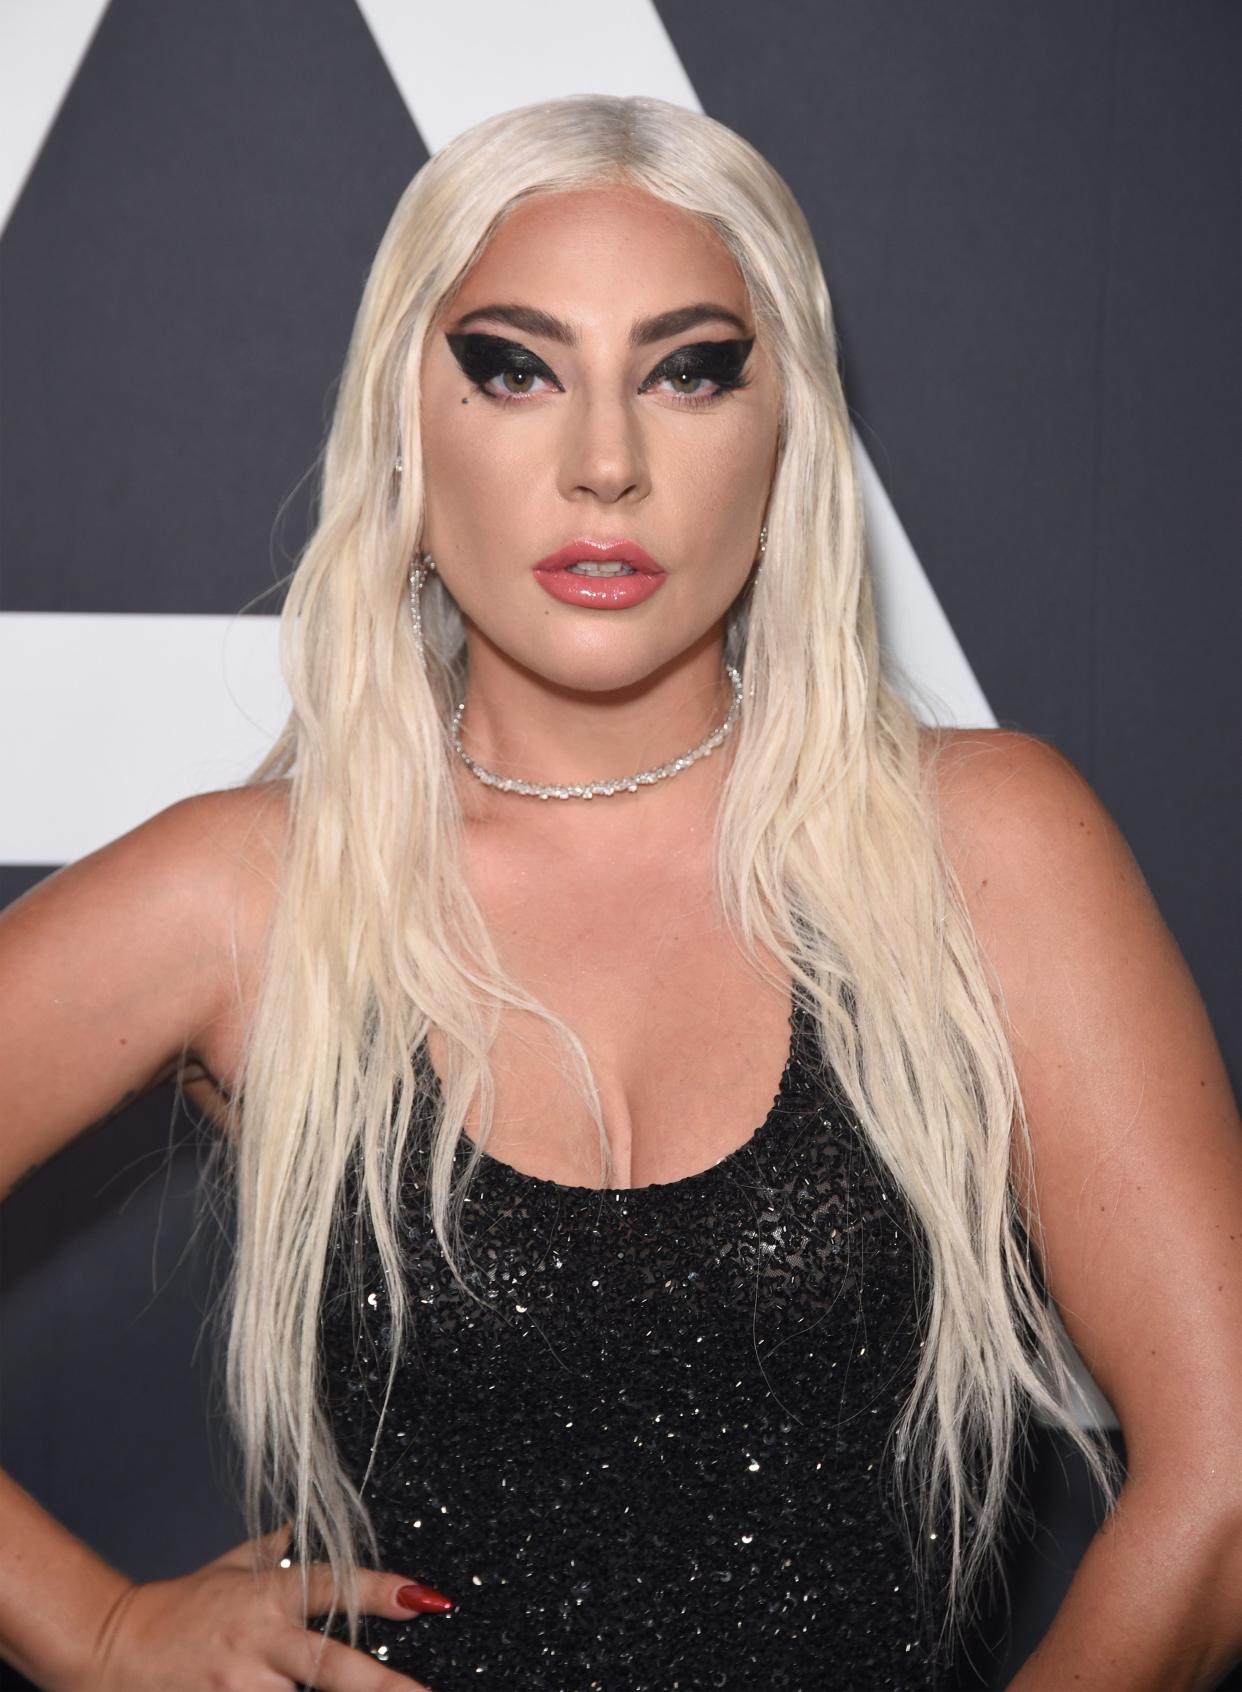 Lady Gaga poses wearing dark winged eye makeup and a sparkly black tank top